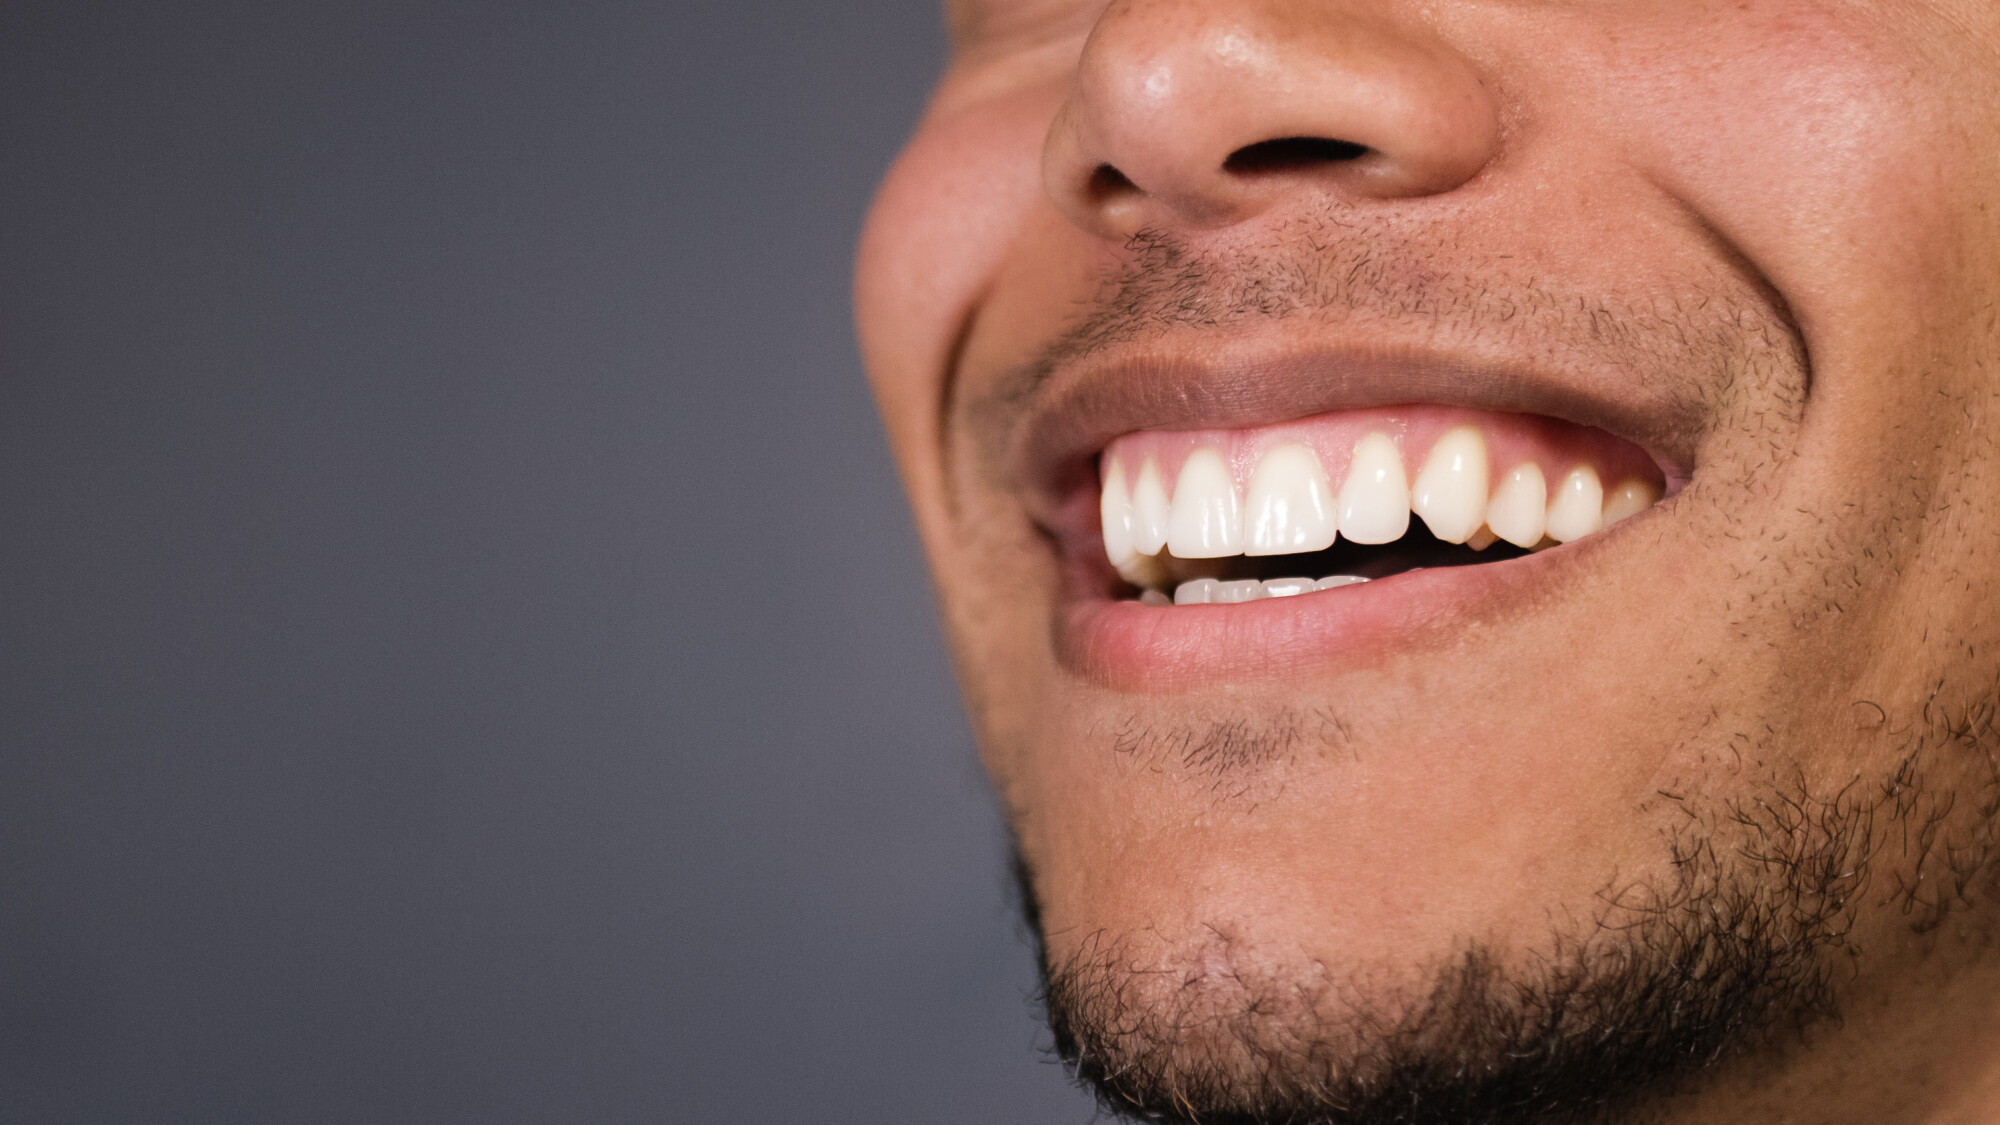 If you have one or more missing teeth, then your dentist may recommend dental bridges. But what are these exactly? Click here to learn more.